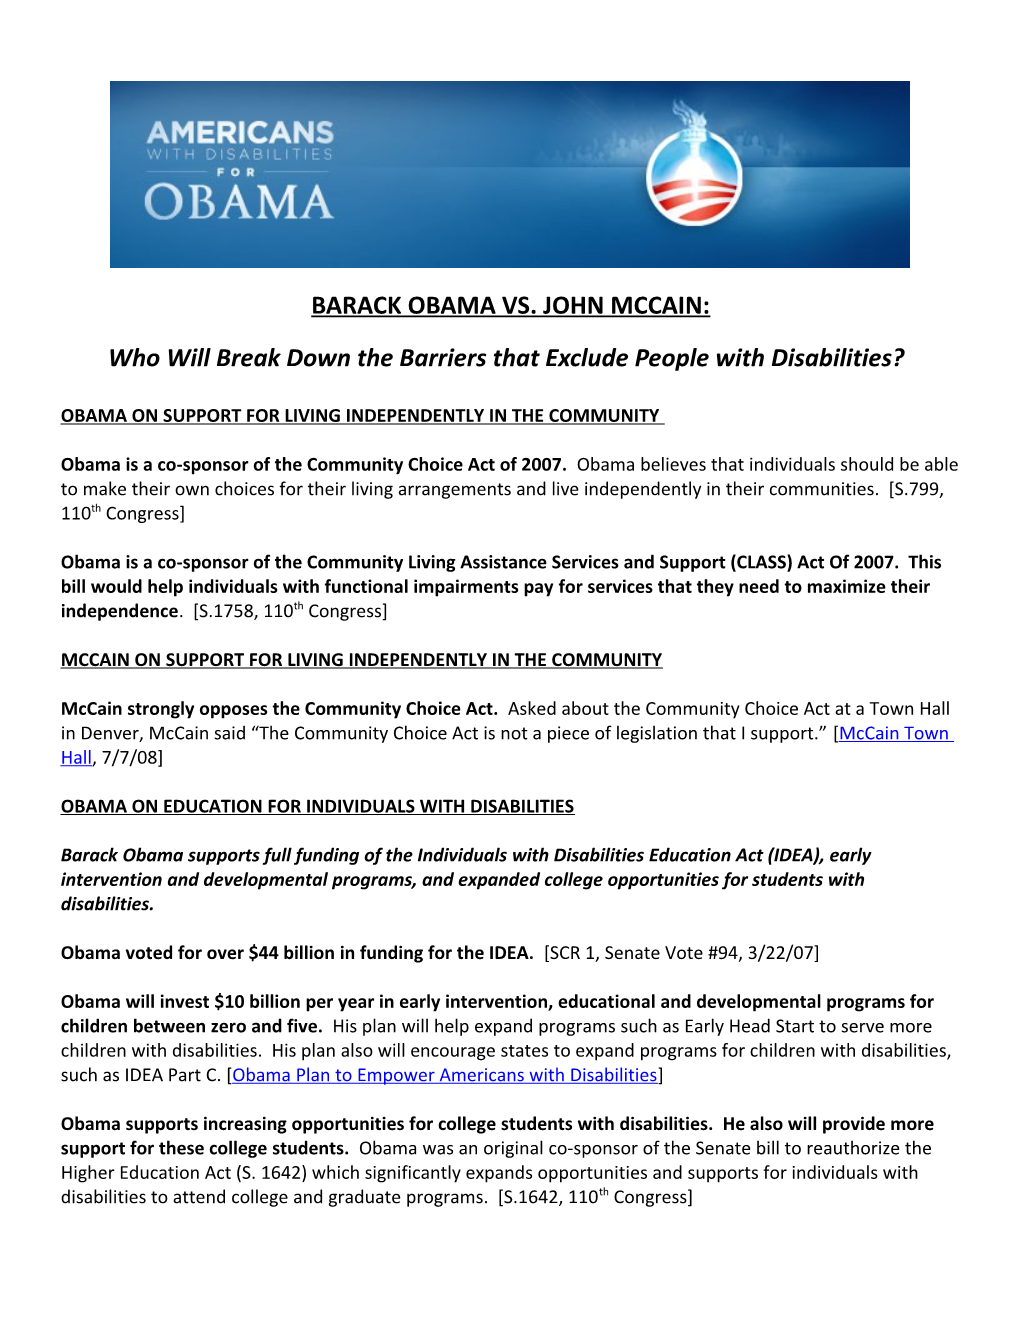 Obama and Mccain on Disability Issues